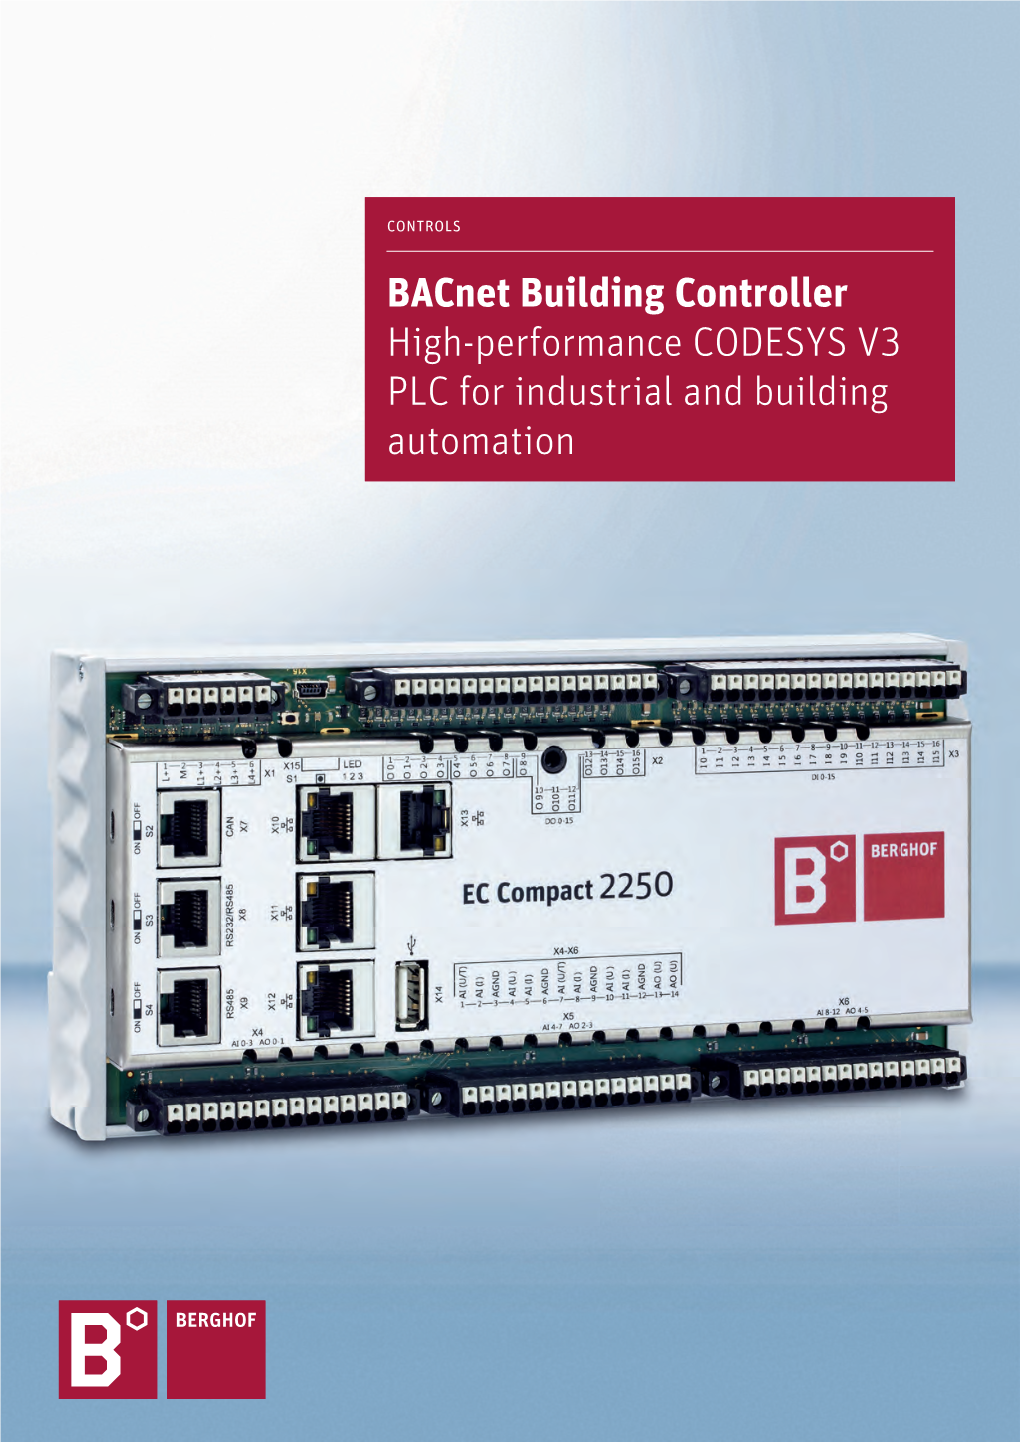 Bacnet Building Controller High-Performance CODESYS V3 PLC for Industrial and Building Automation Efficient Building Automation with Intelligent Control Solutions